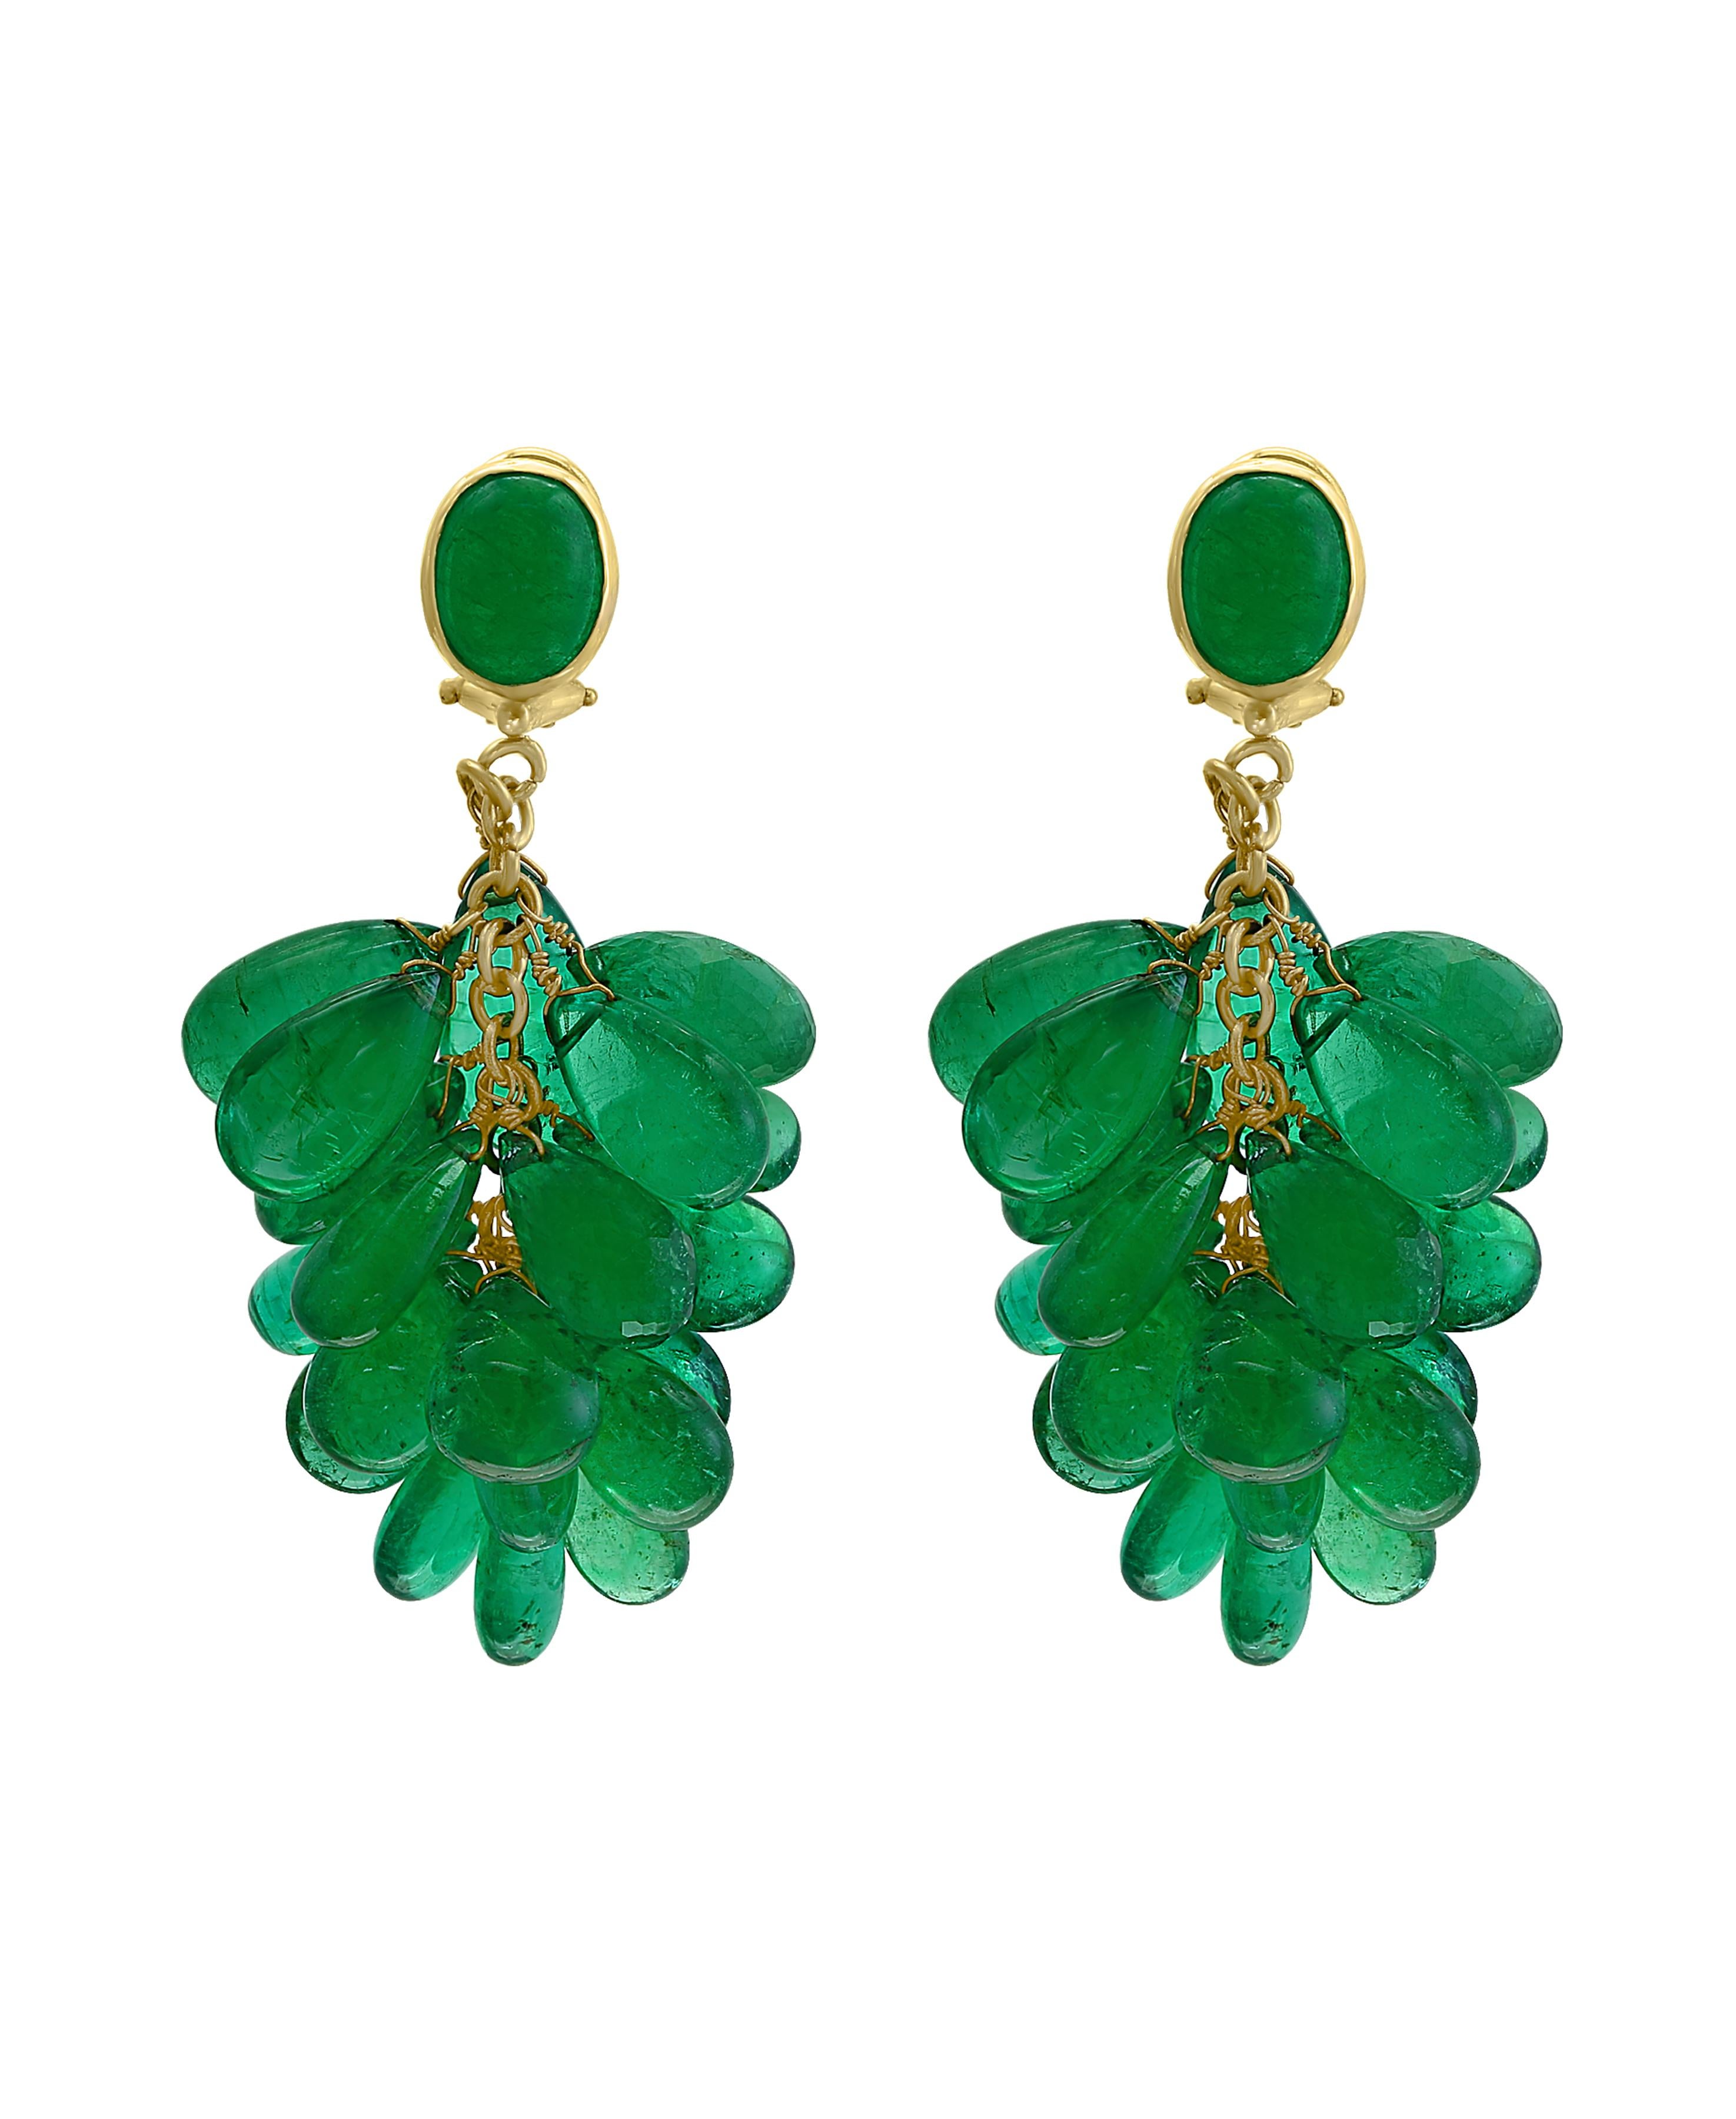 140 Carats Emerald Briolettes   Hanging Earrings  18 Karat Gold.
This exquisite pair of earrings are beautifully crafted with 18 karat yellow gold  weighing 16.5 grams
This pair of Earrings has two fine  Cabochon Emerald  weighing approximately 16